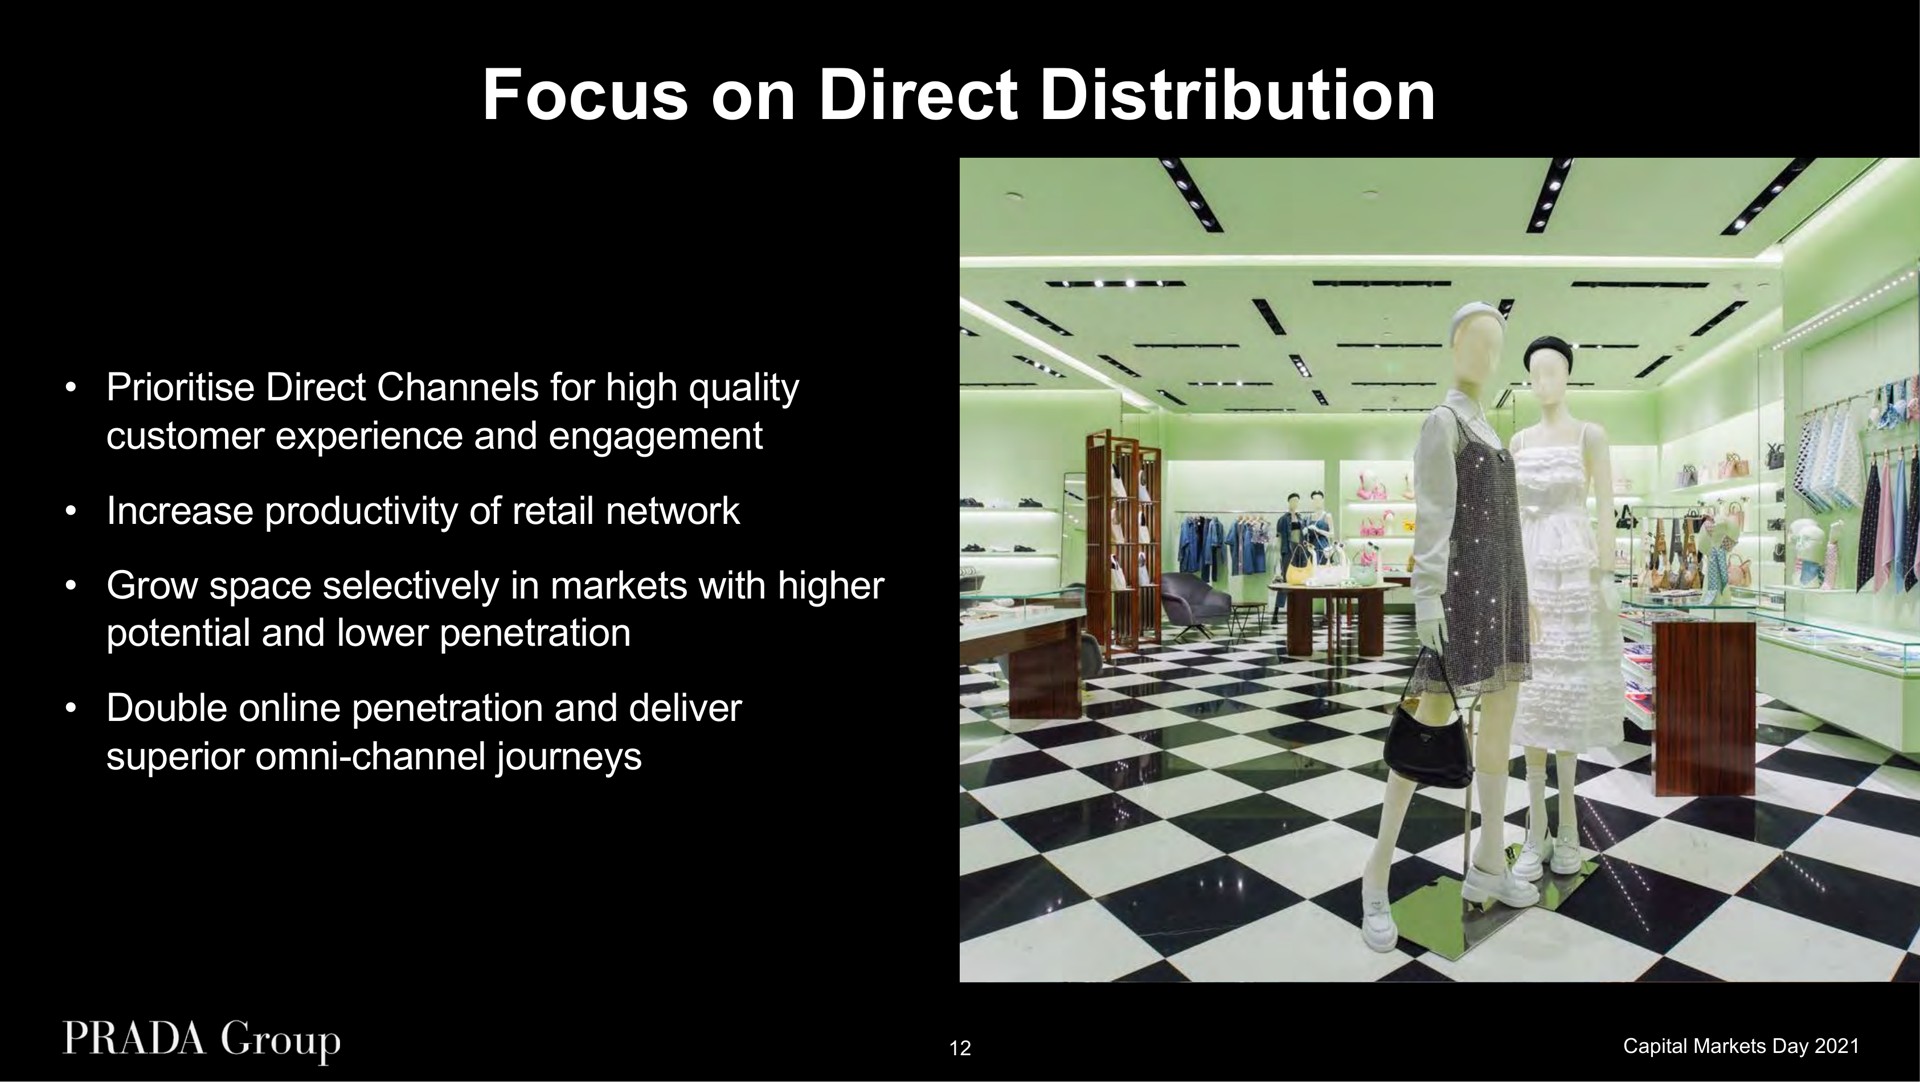 focus on direct distribution direct channels for high quality customer experience and engagement increase productivity of retail network grow space selectively in markets with higher potential and lower penetration double penetration and deliver superior channel journeys | Prada